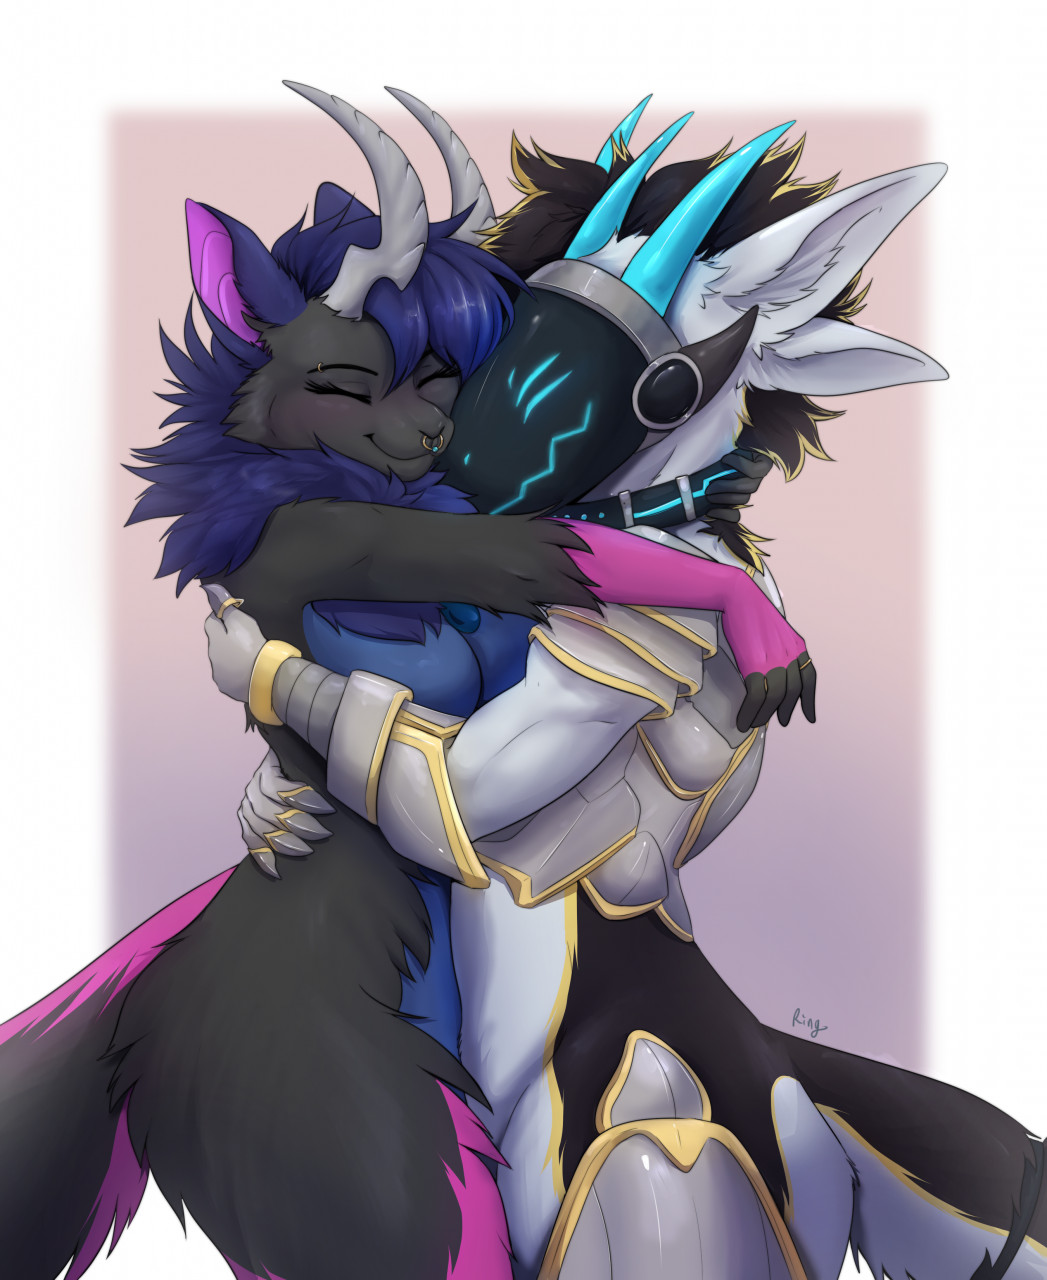 cute 2 protogens hugging each other ( Commission ) by Emillianz on